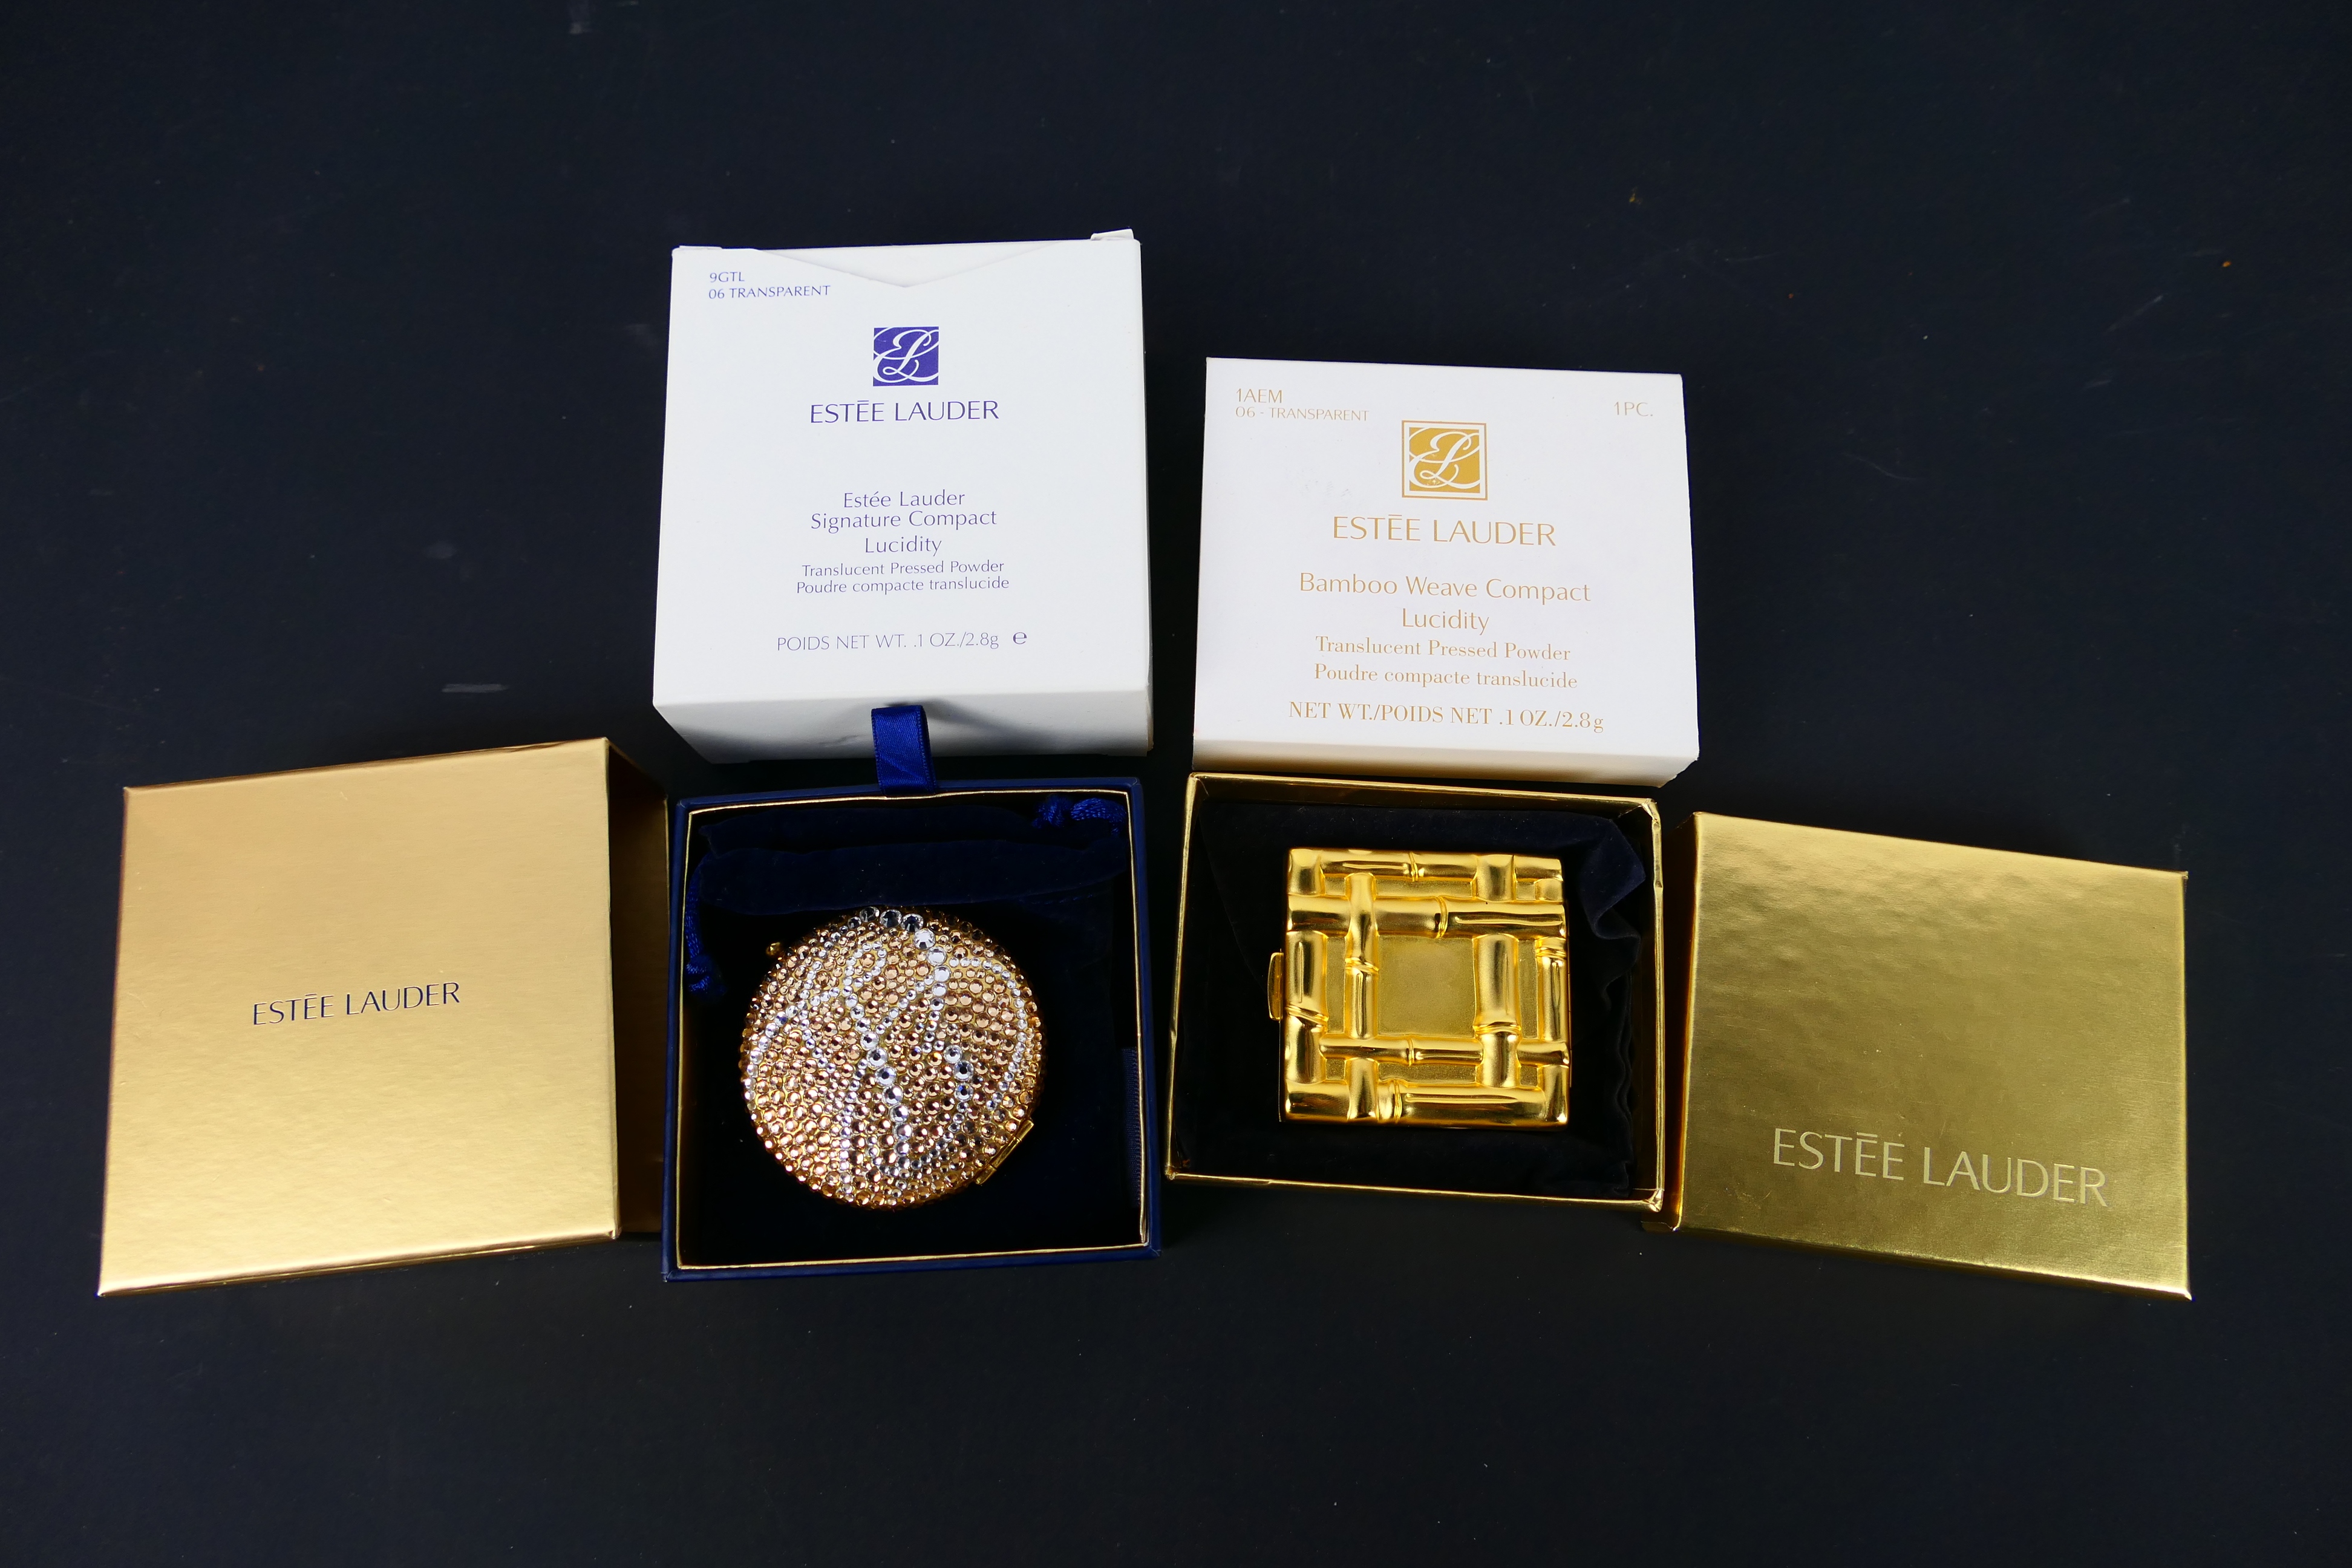 Estee Lauder - 2 x boxed gilt metal Estee Lauder powder compacts - Lot includes a Bamboo Weave - Image 10 of 10